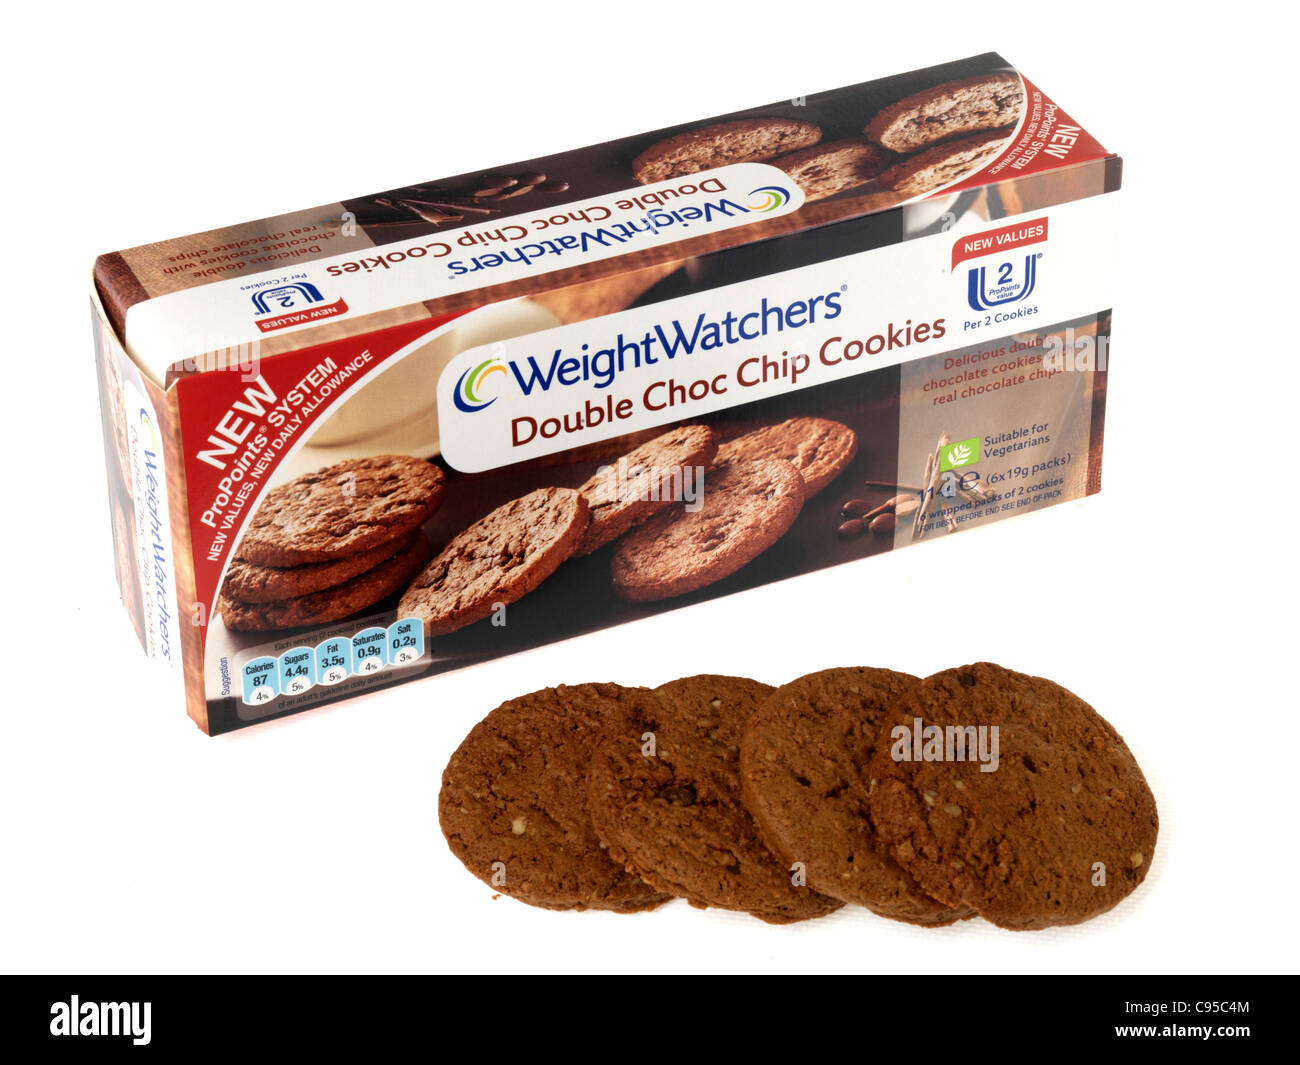 Double choc chip cookies weight watchers Banque D'Images